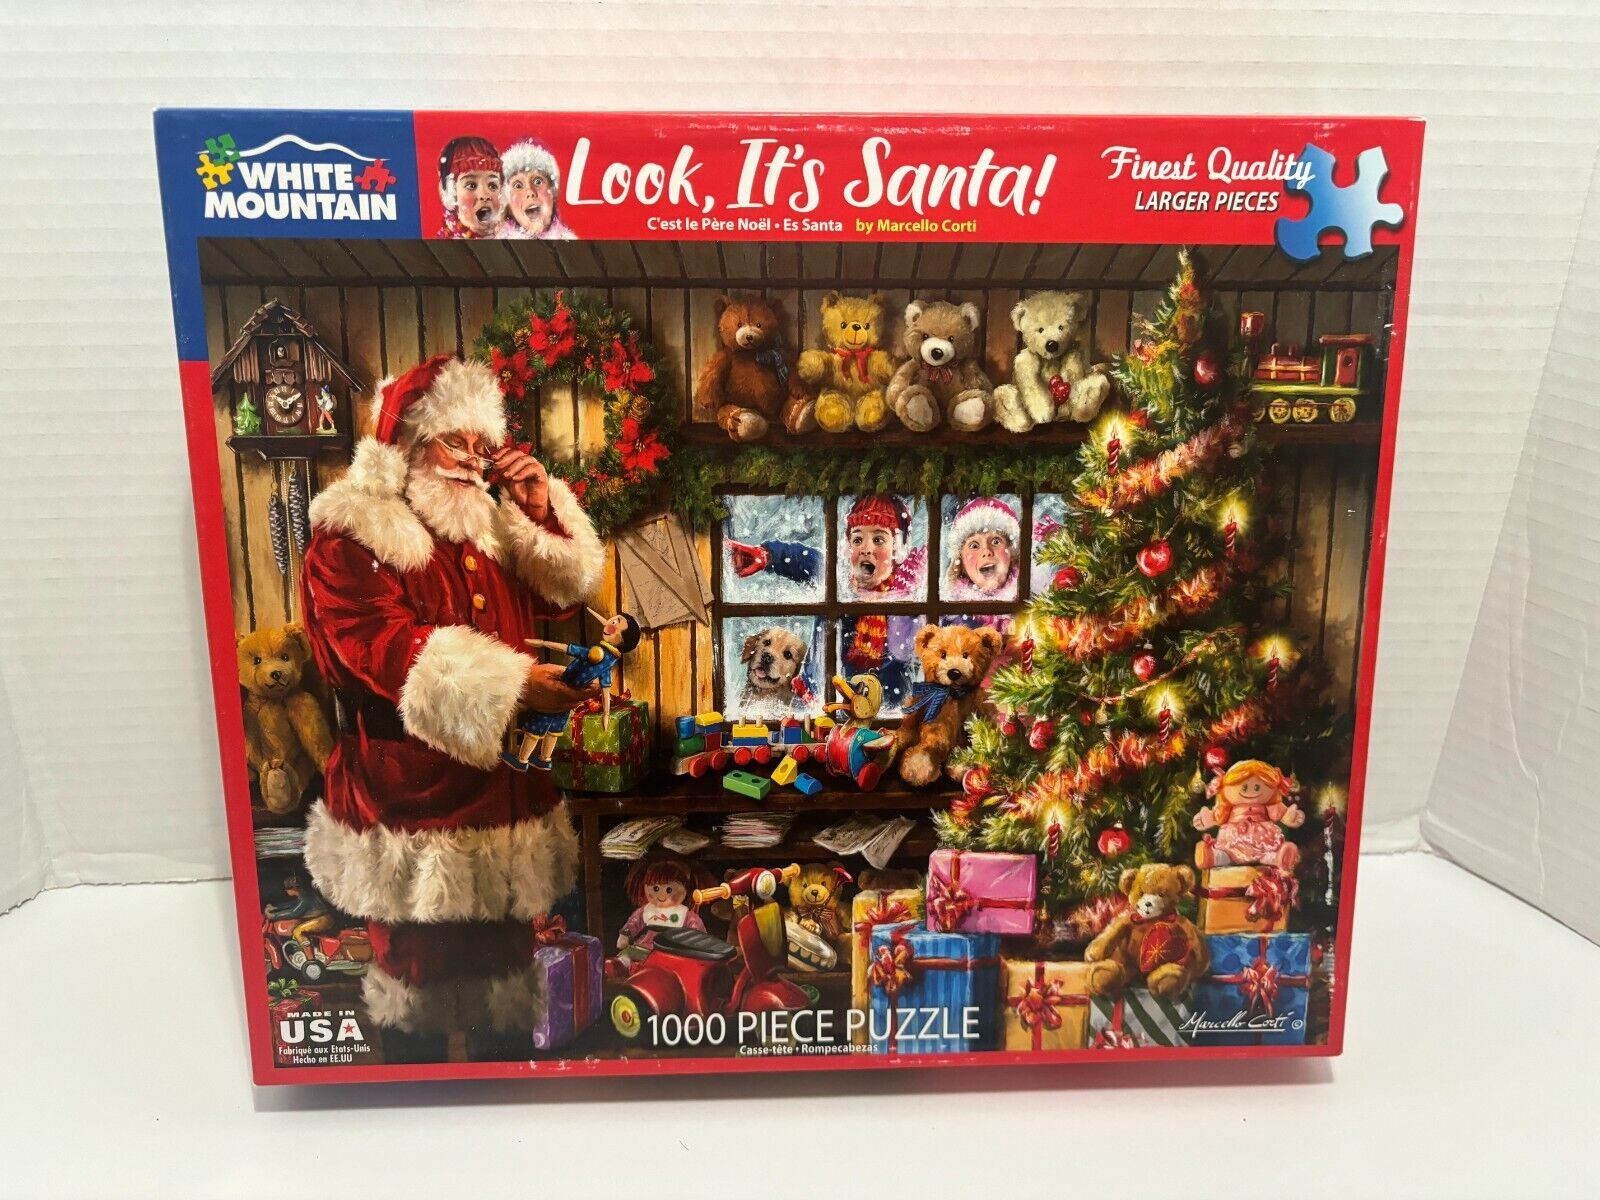 White Mountain Christmas "Look, It's Santa" 1000 Piece Jigsaw Puzzle & Poster - $9.65